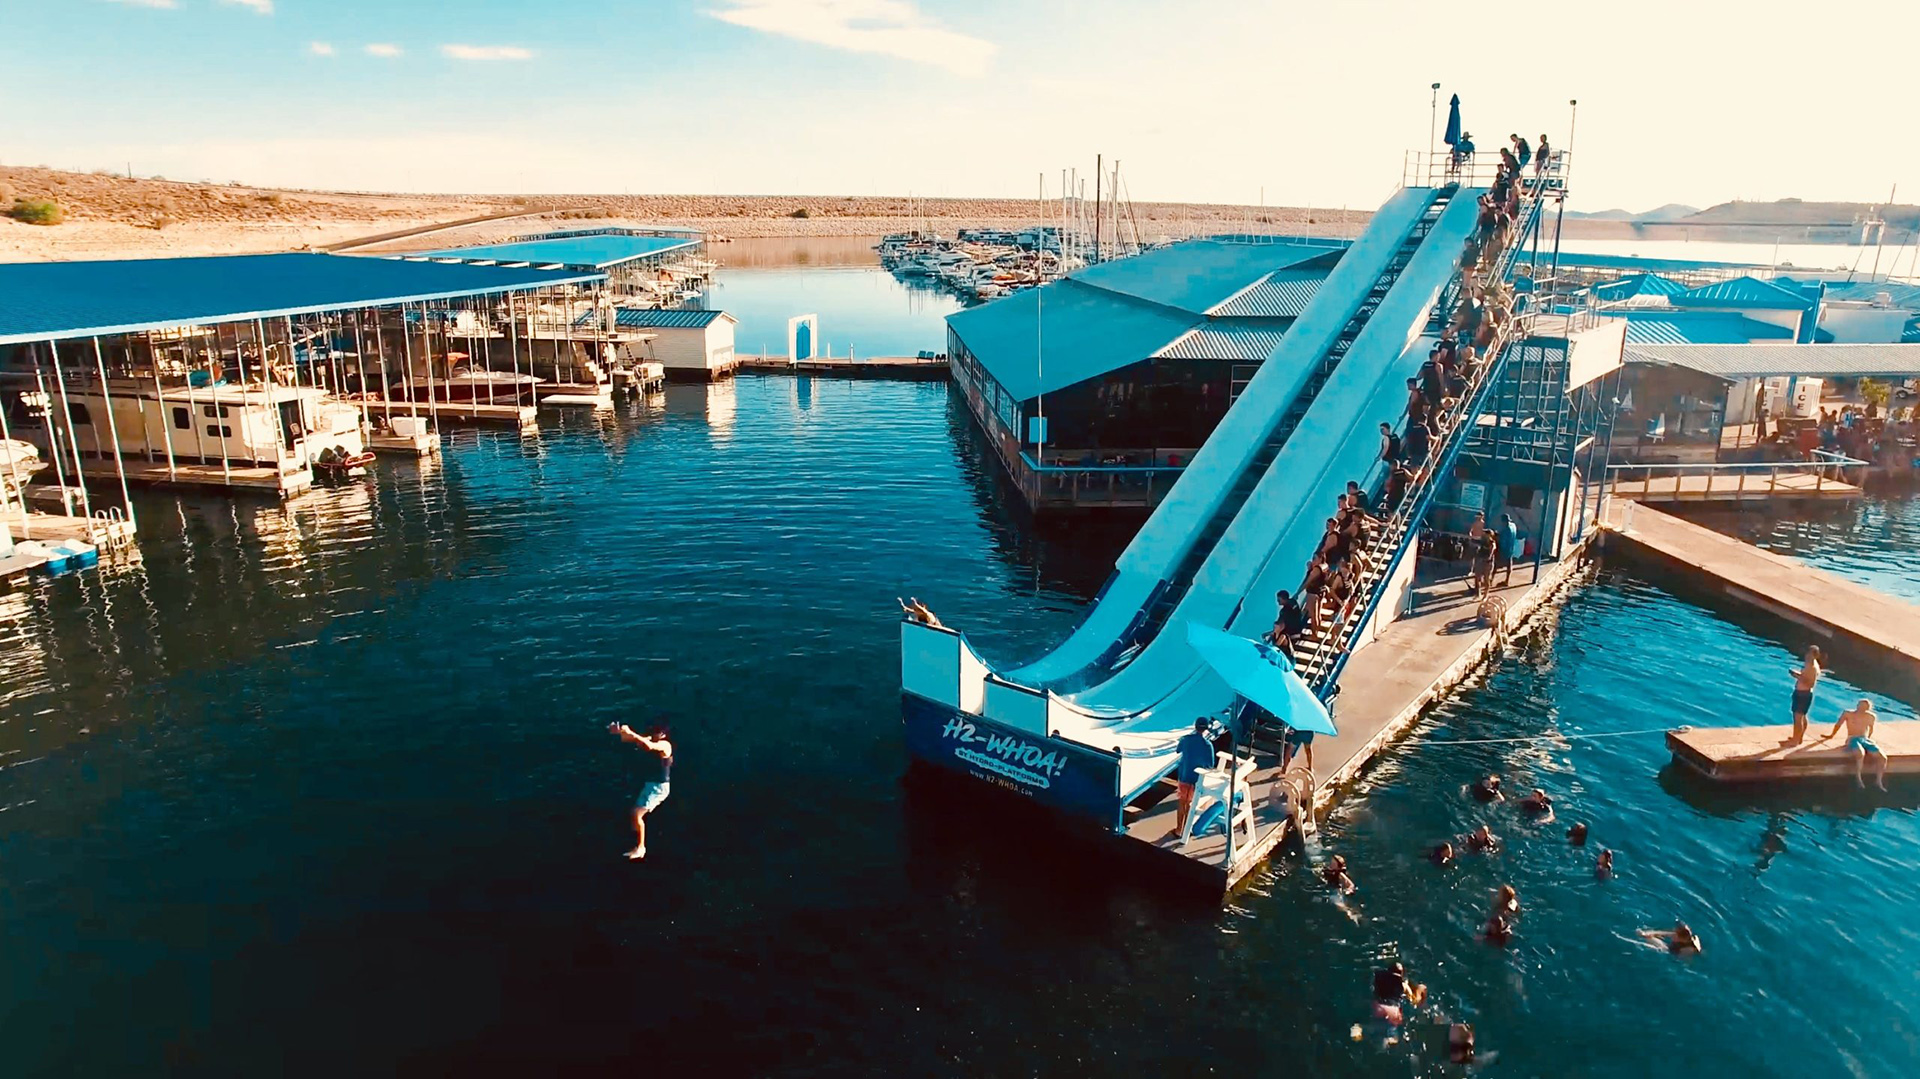 Ariel view of the H2Whoa slide at Lake Pleasant with a person going off the slide